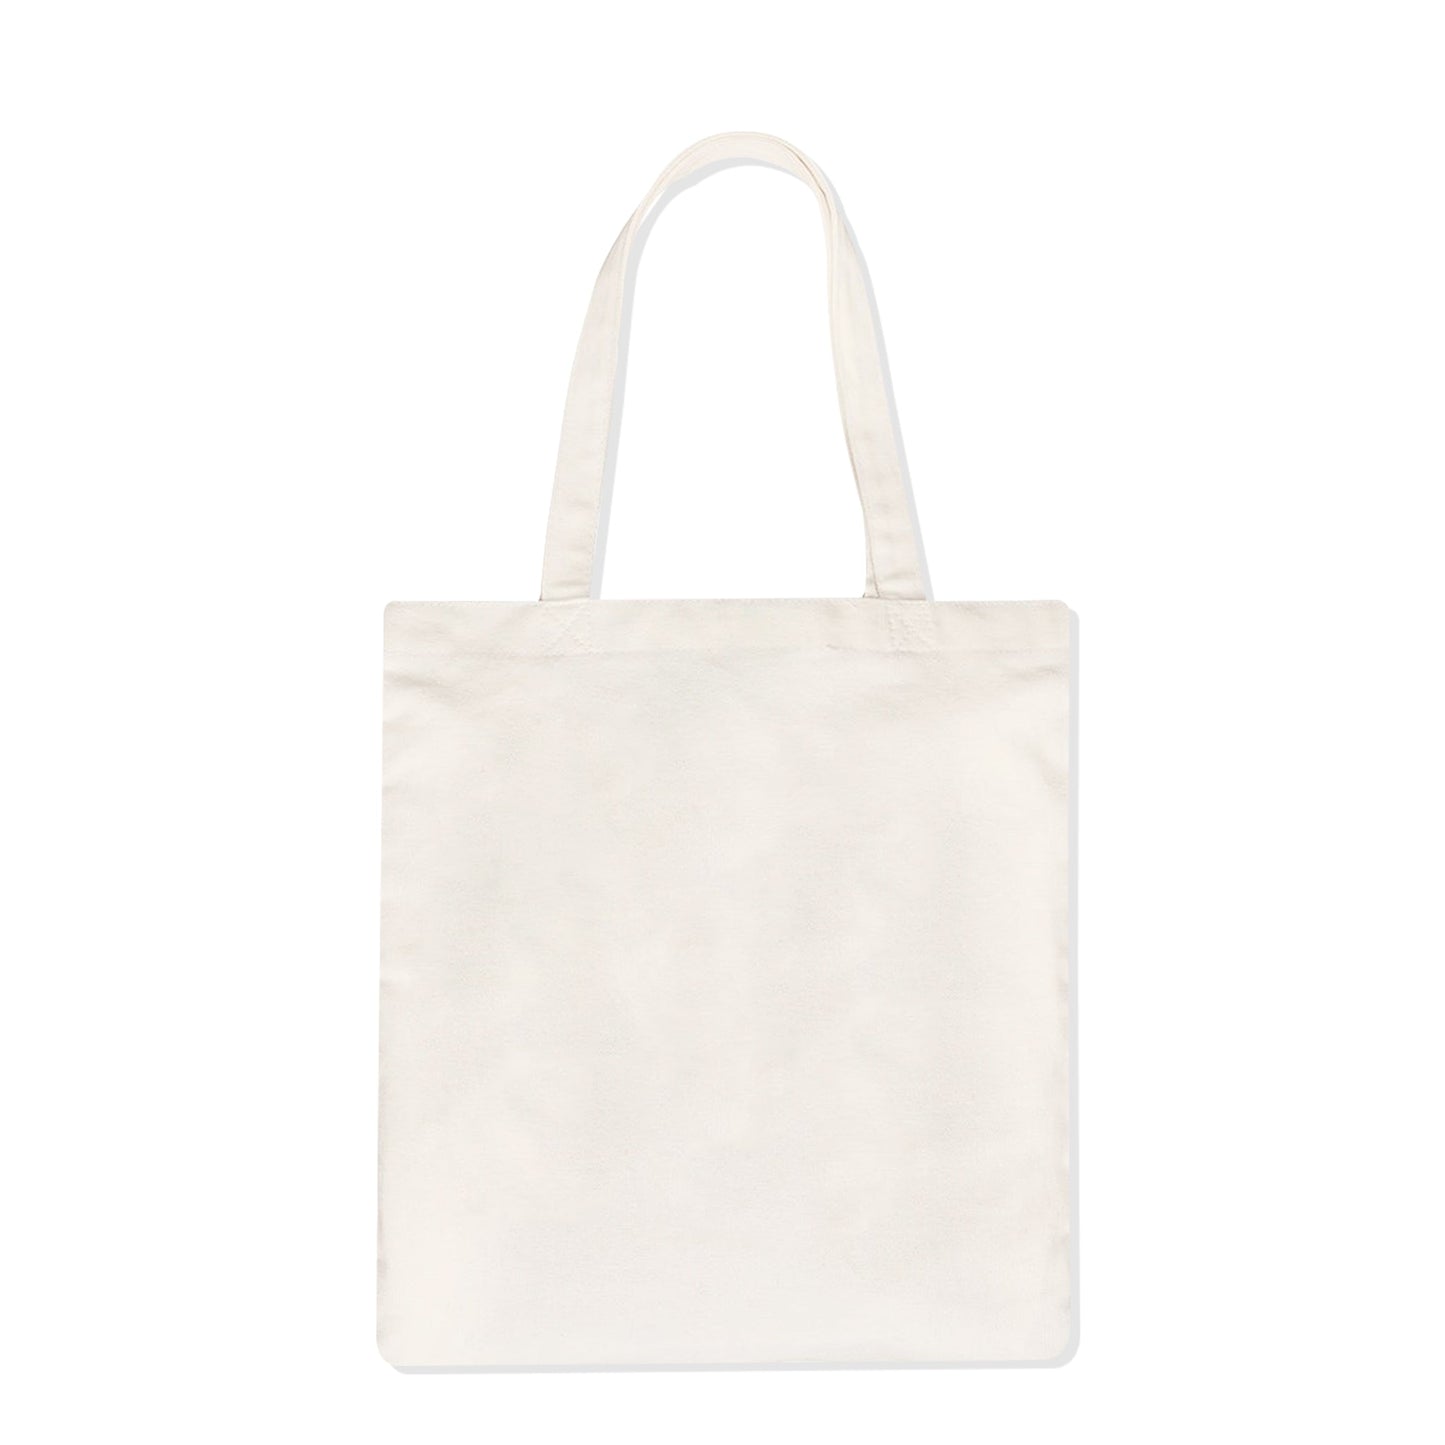 Save What Is Left Natural Tote Bag - One Choice Apparel